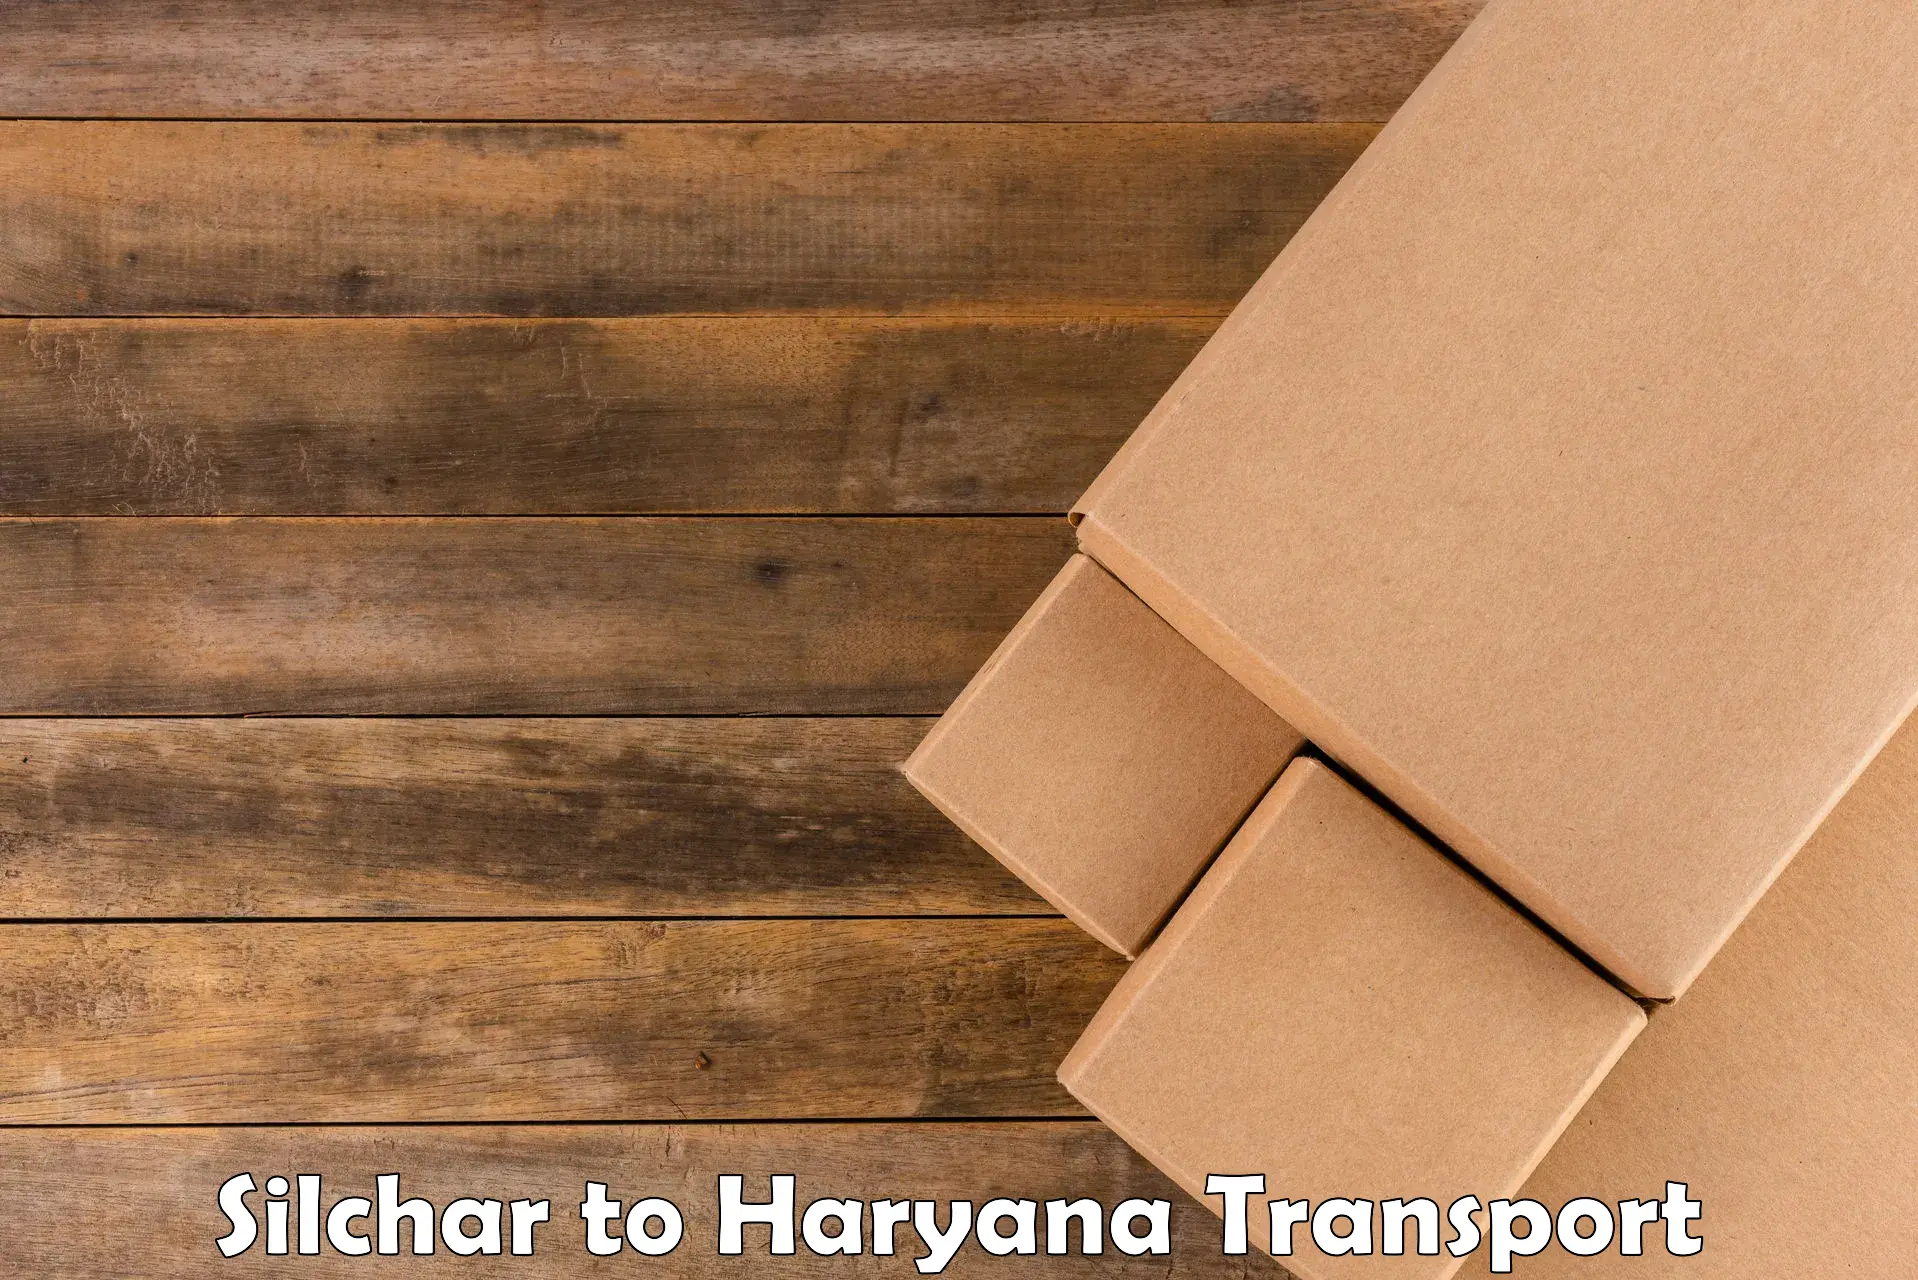 Container transport service Silchar to Faridabad